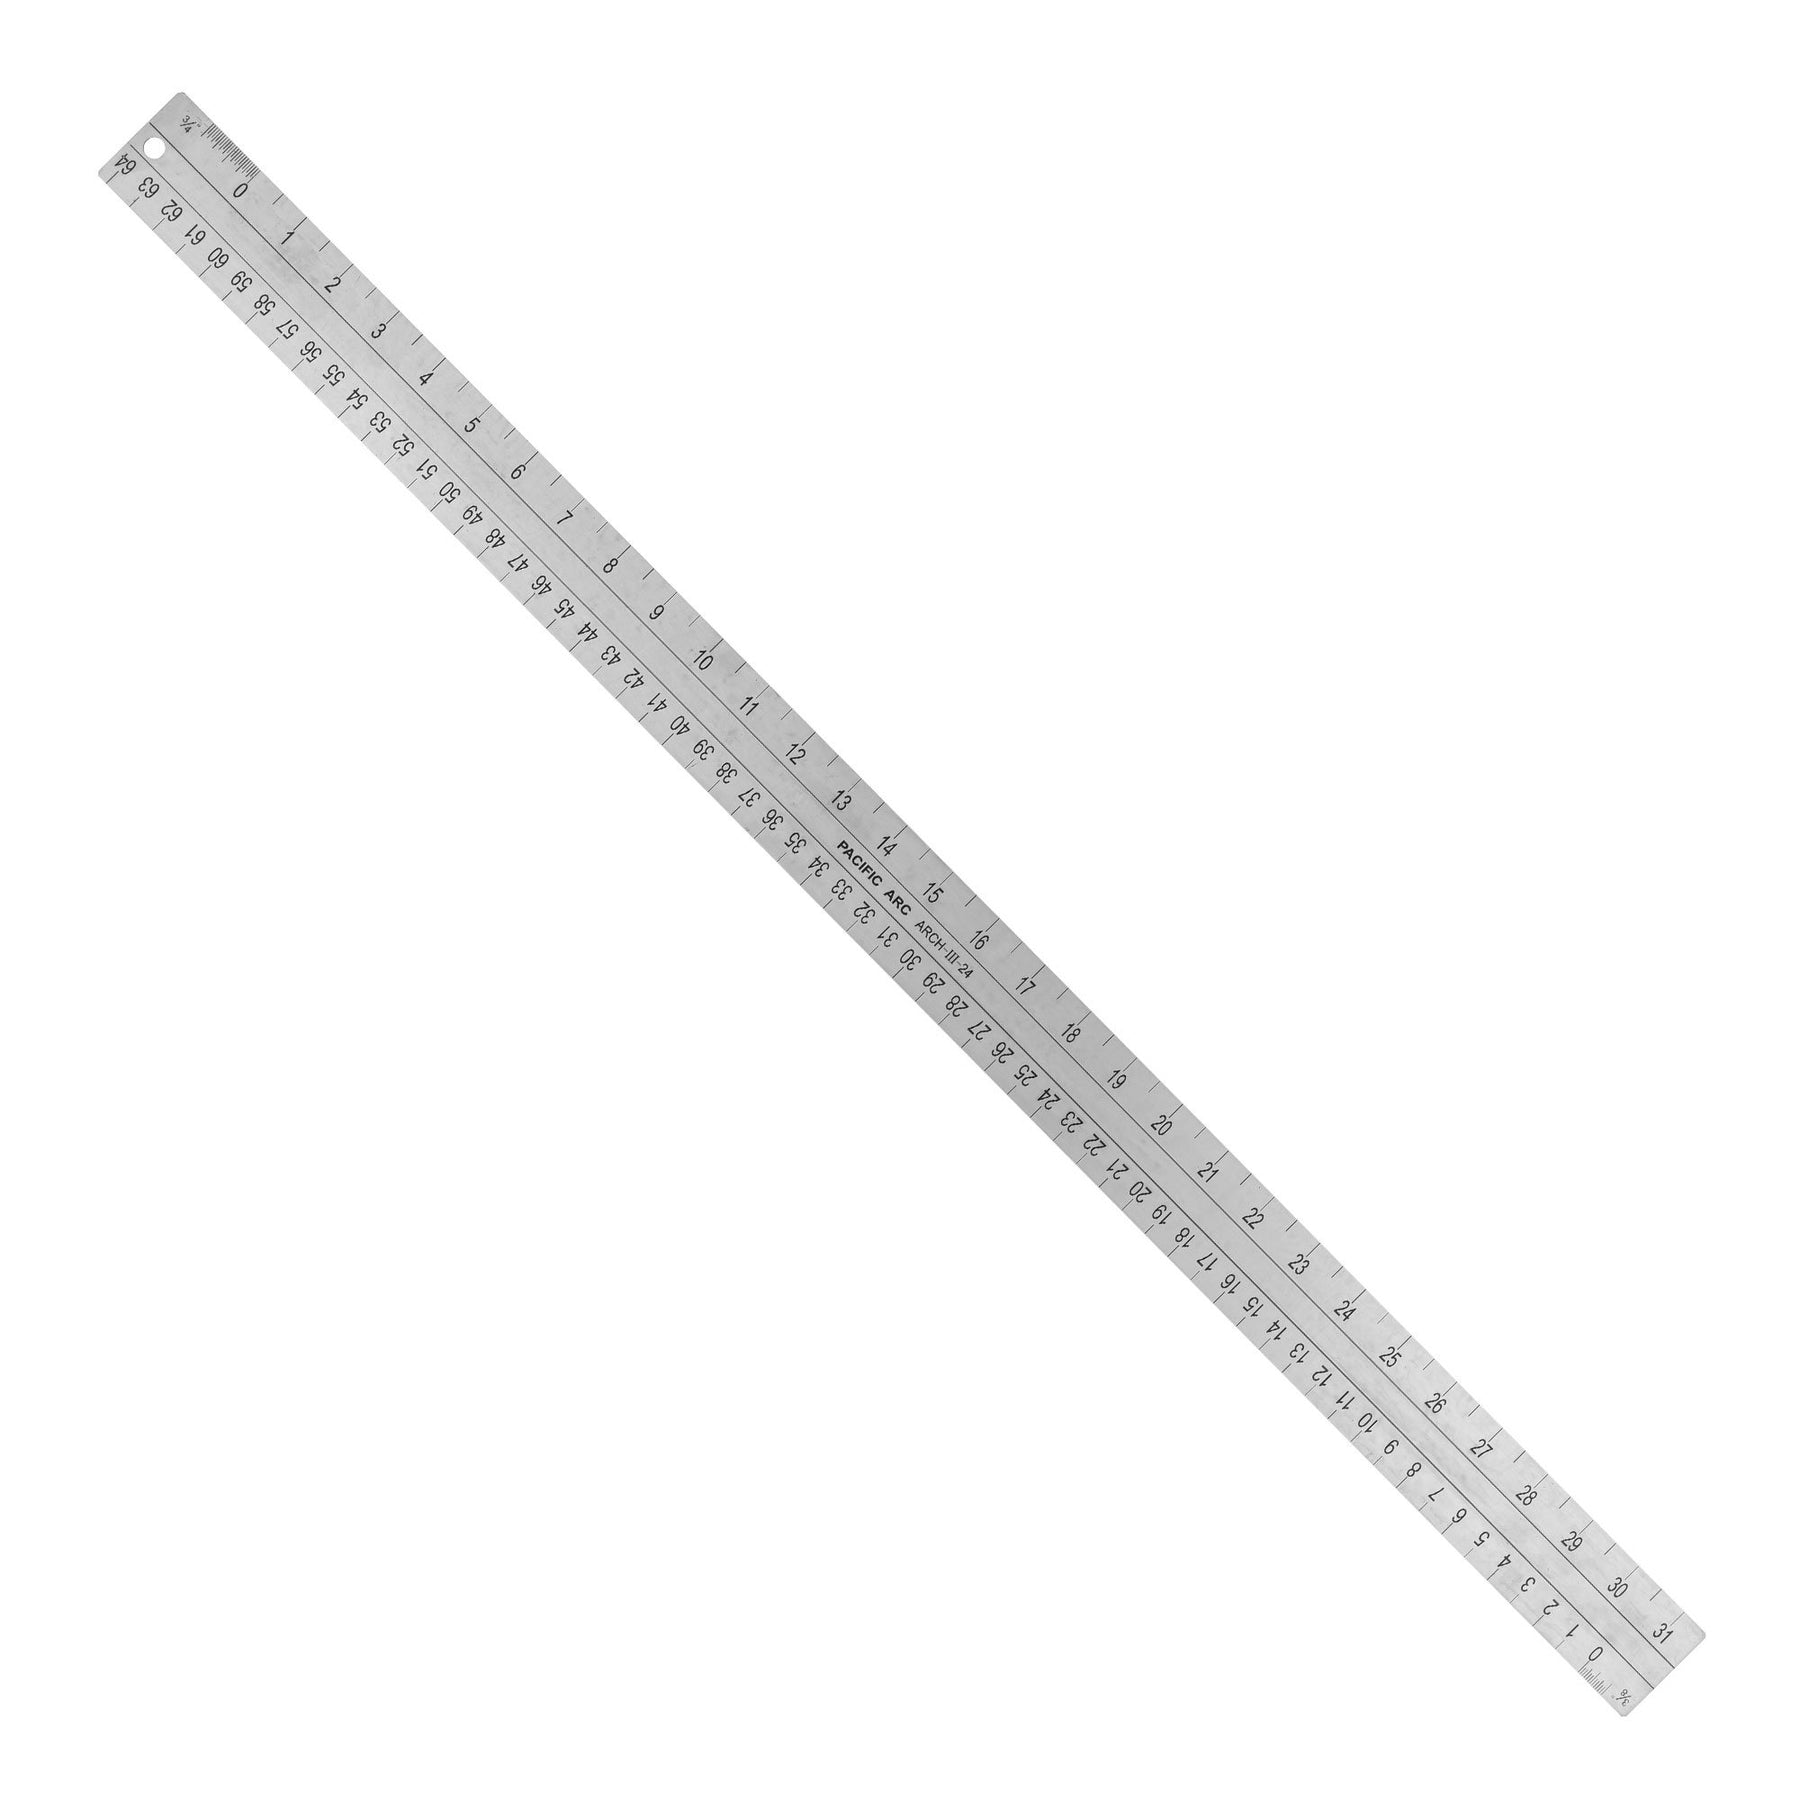 Pacific Arc Engineering & Architect Scaling Ruler, stainless steel